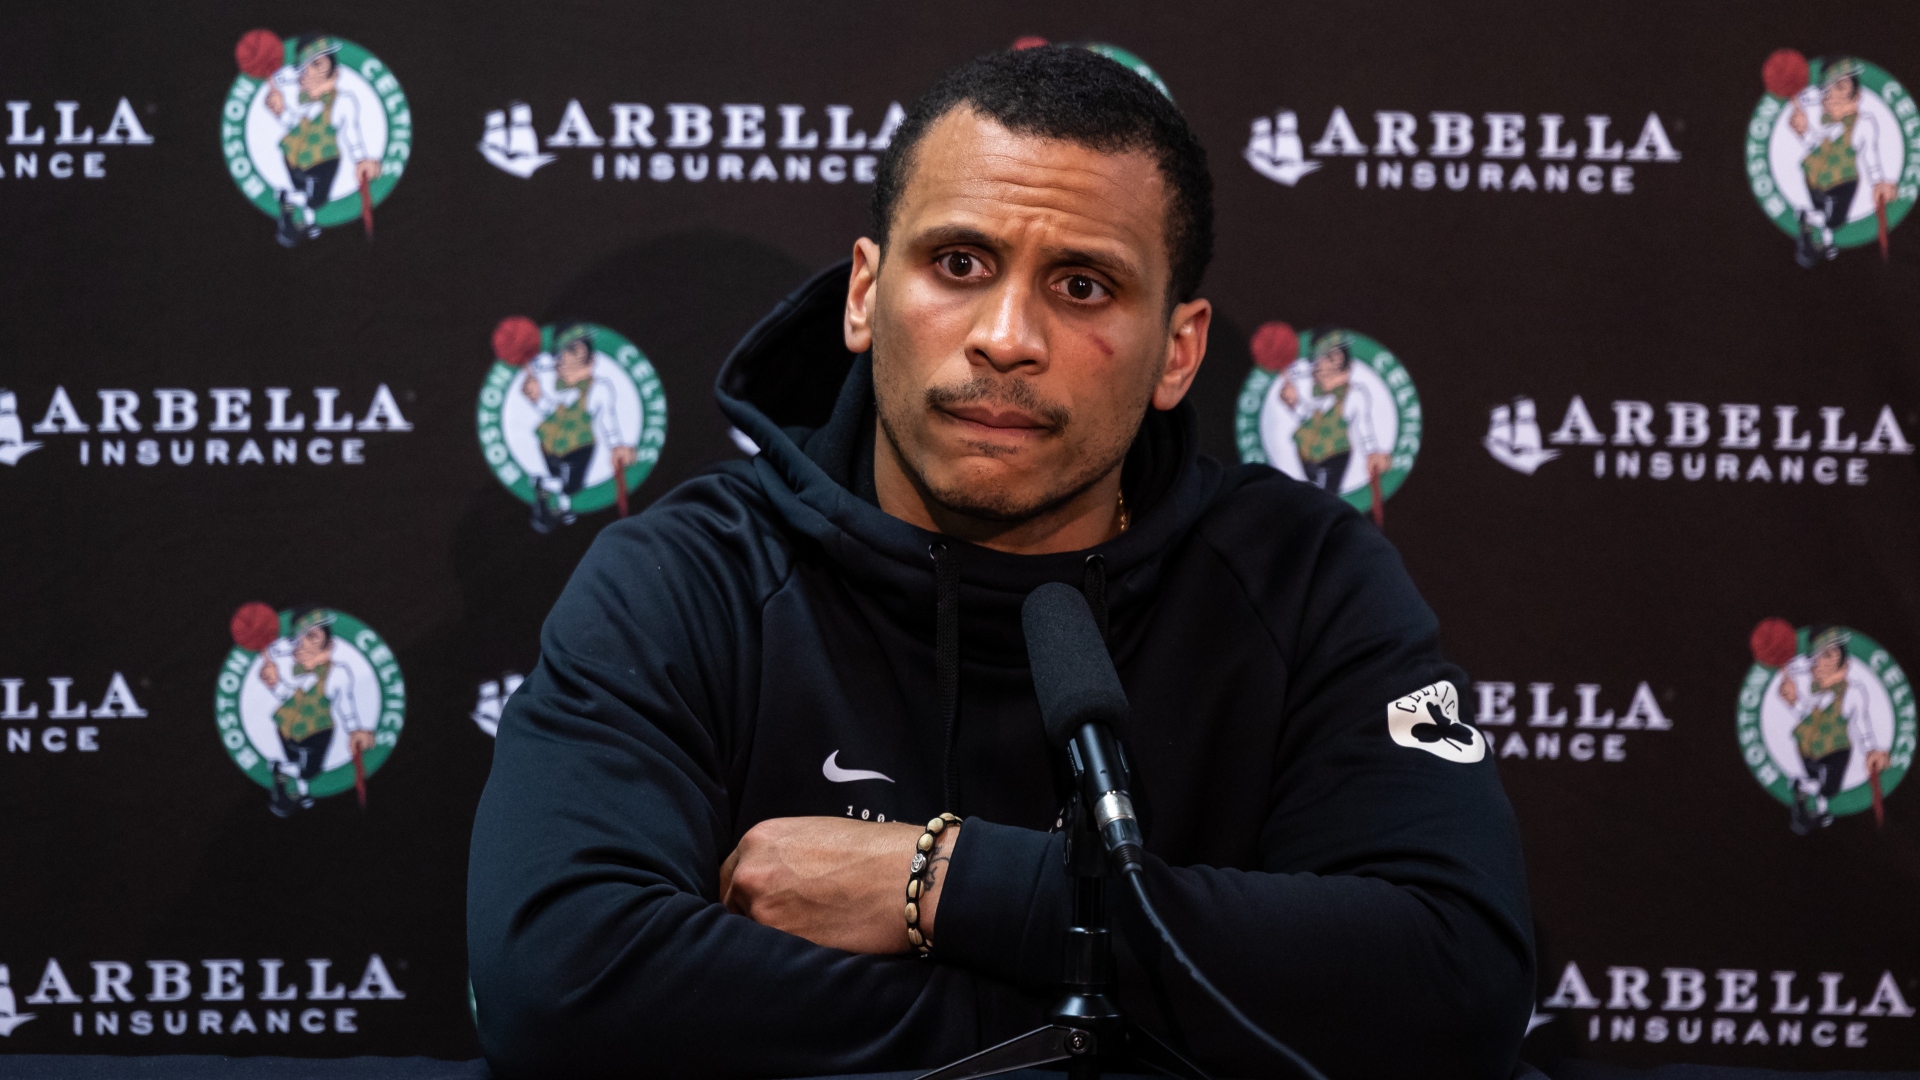 Celtics Won’t Attempt ‘Impossible’; Looking To ‘Stay
Connected’